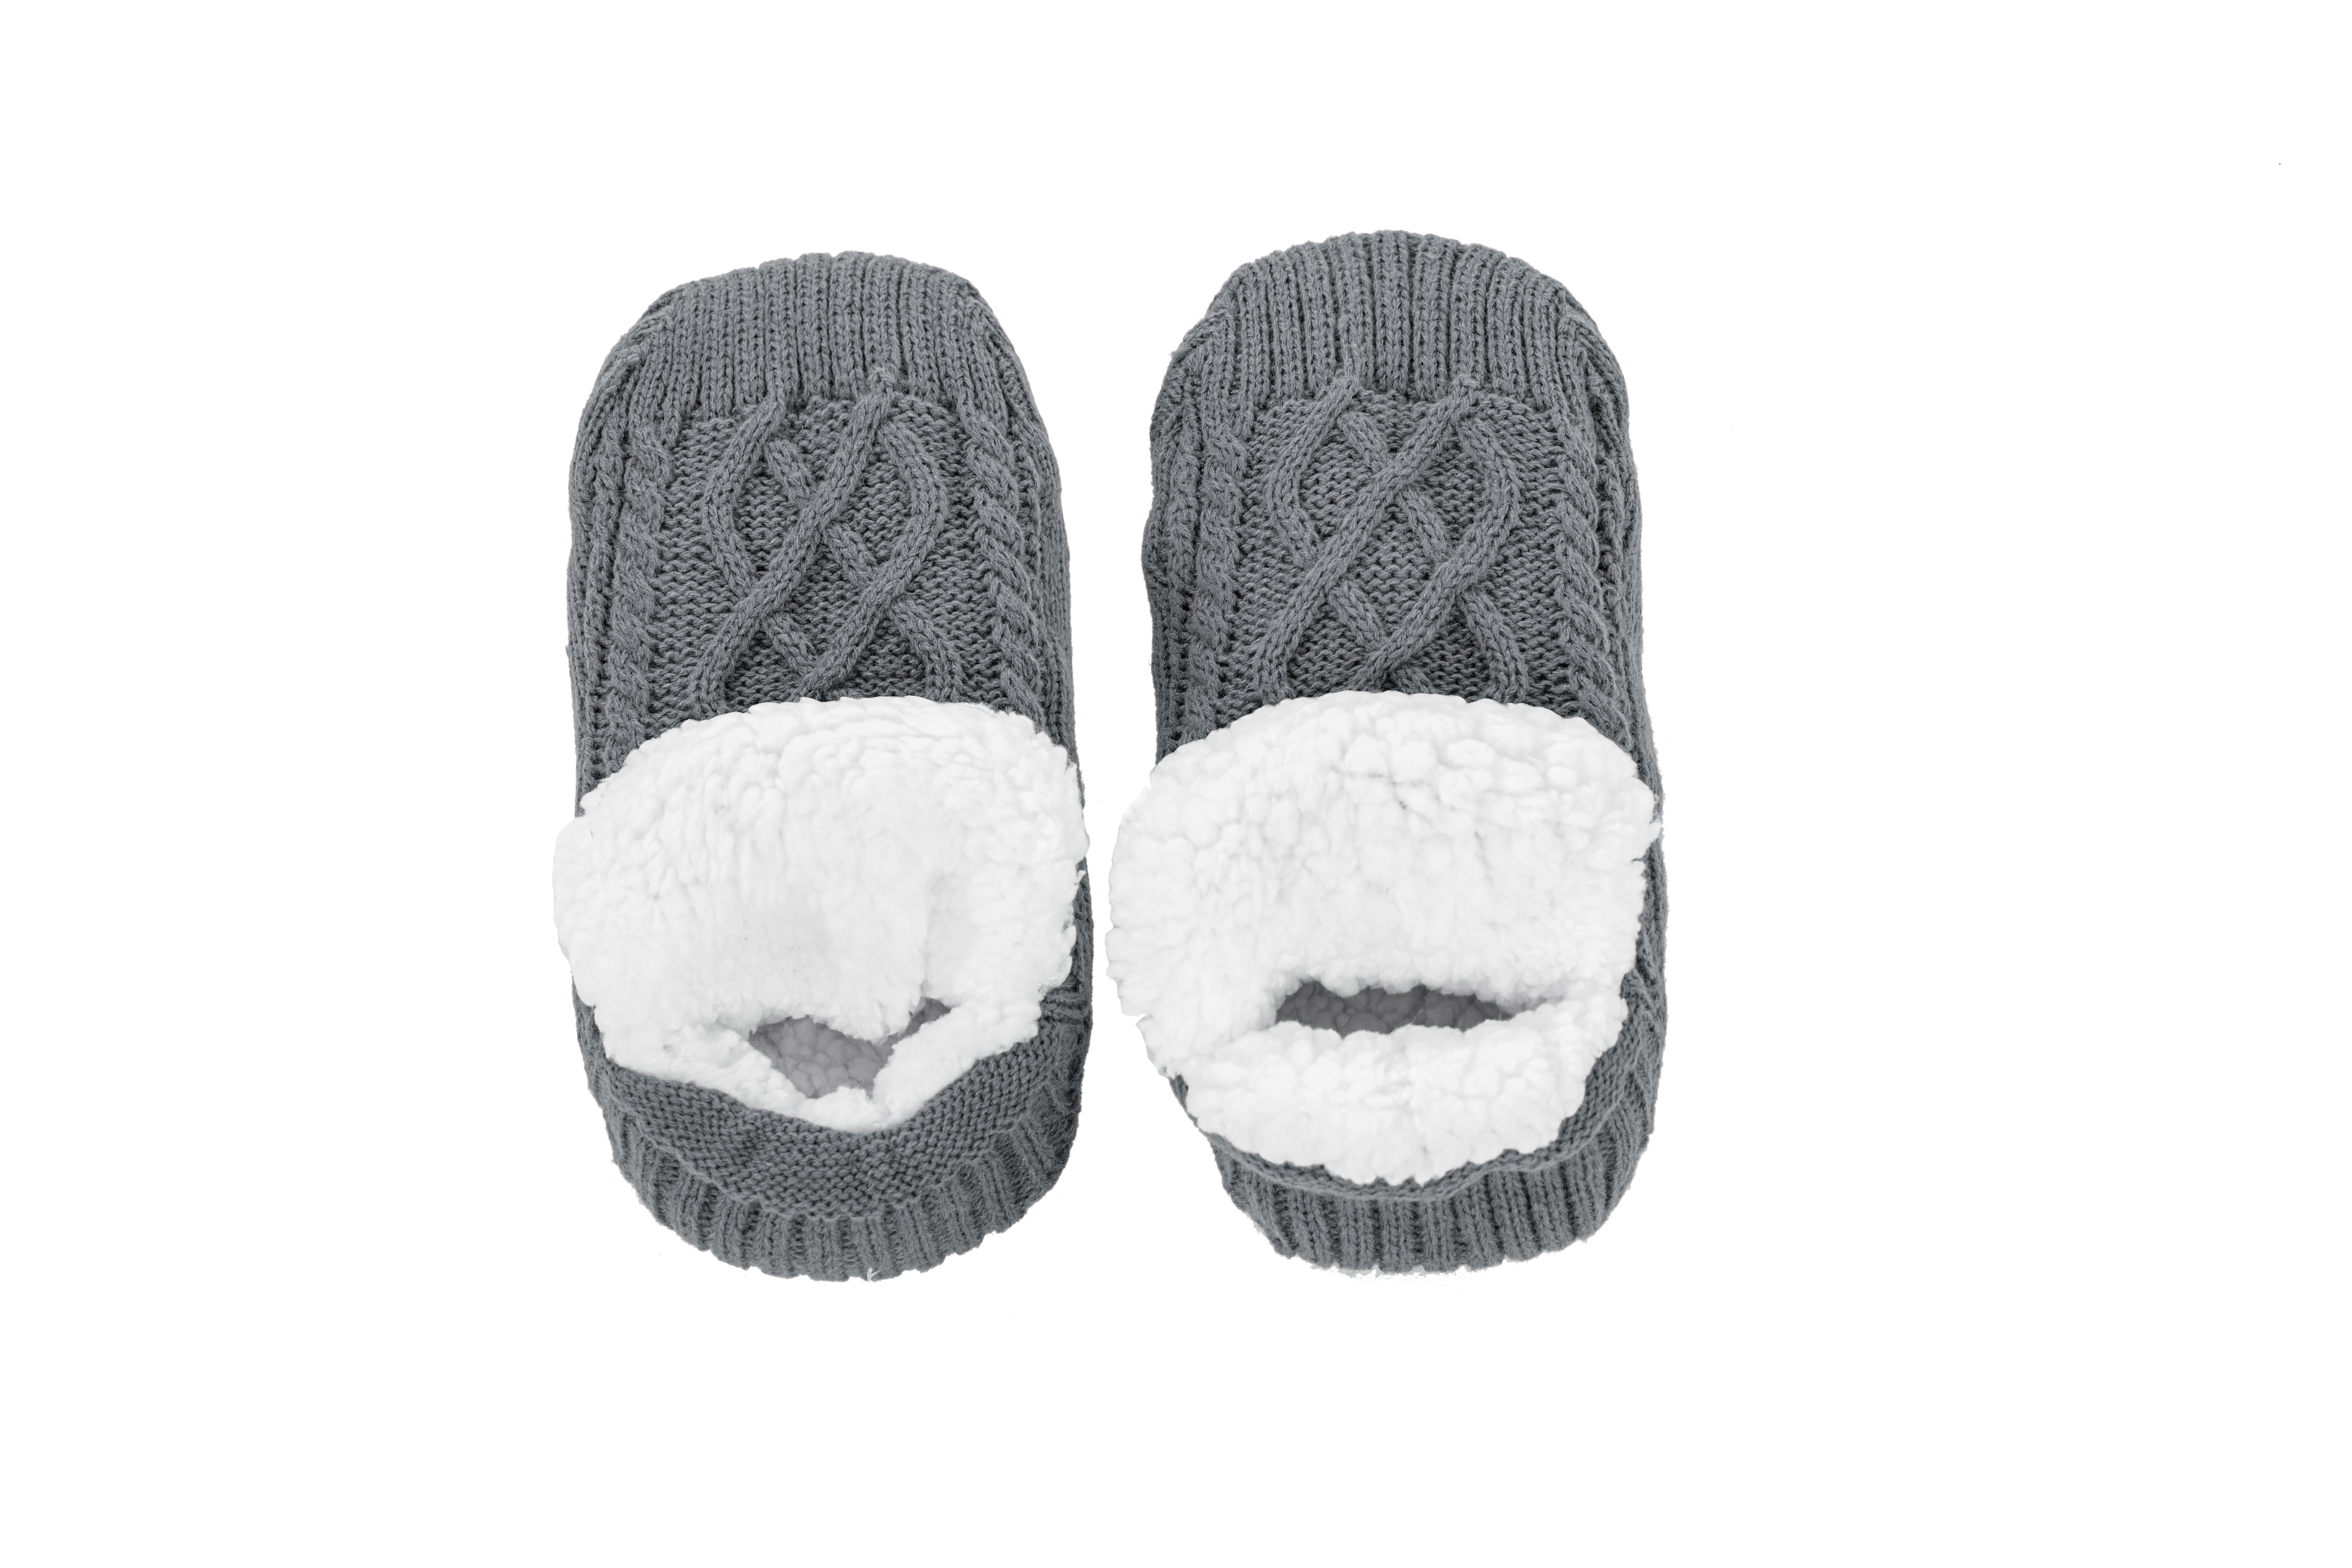 Socks (knitted) COSY, S/M (35-38) - L= 24cm, grey